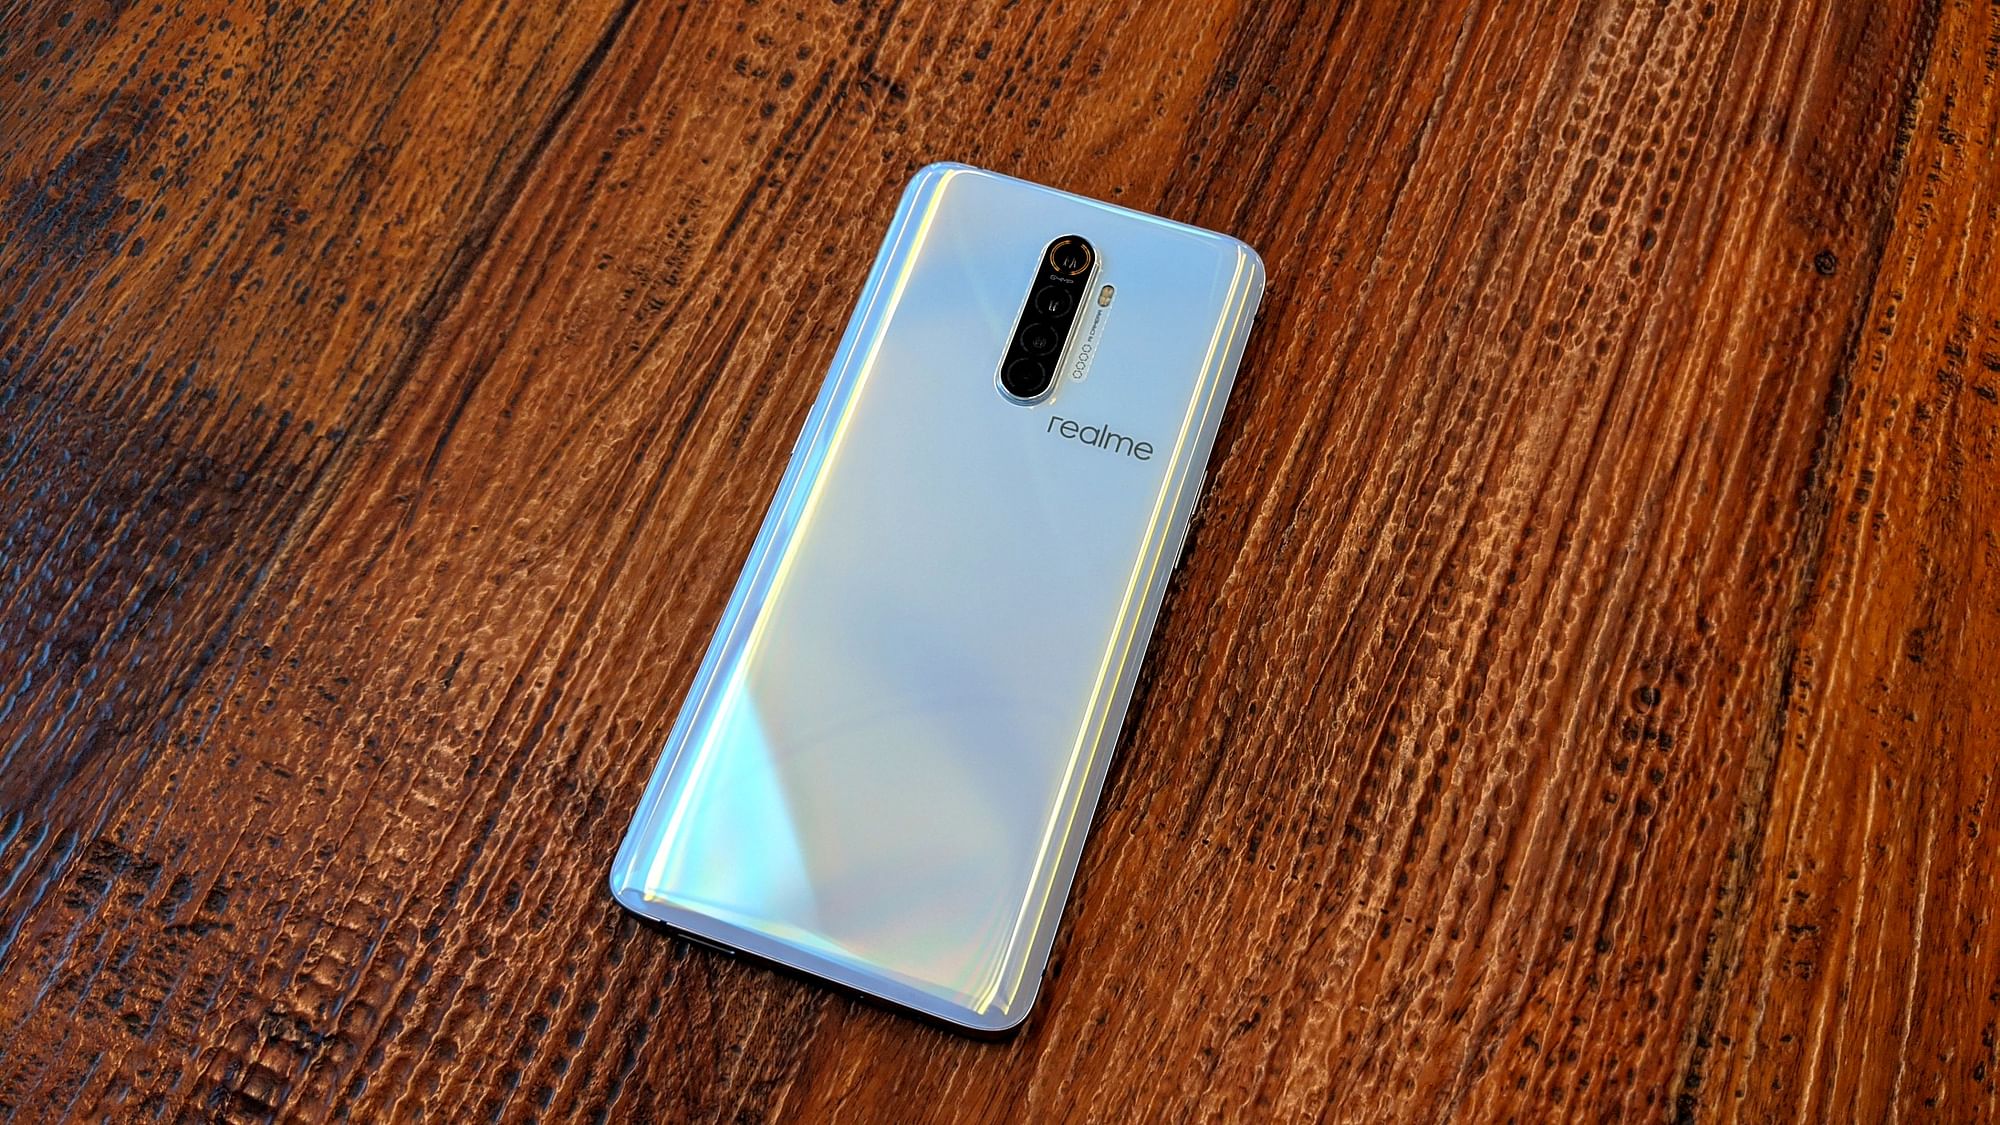 Realme has become a strong rival to Xiaomi in 2019